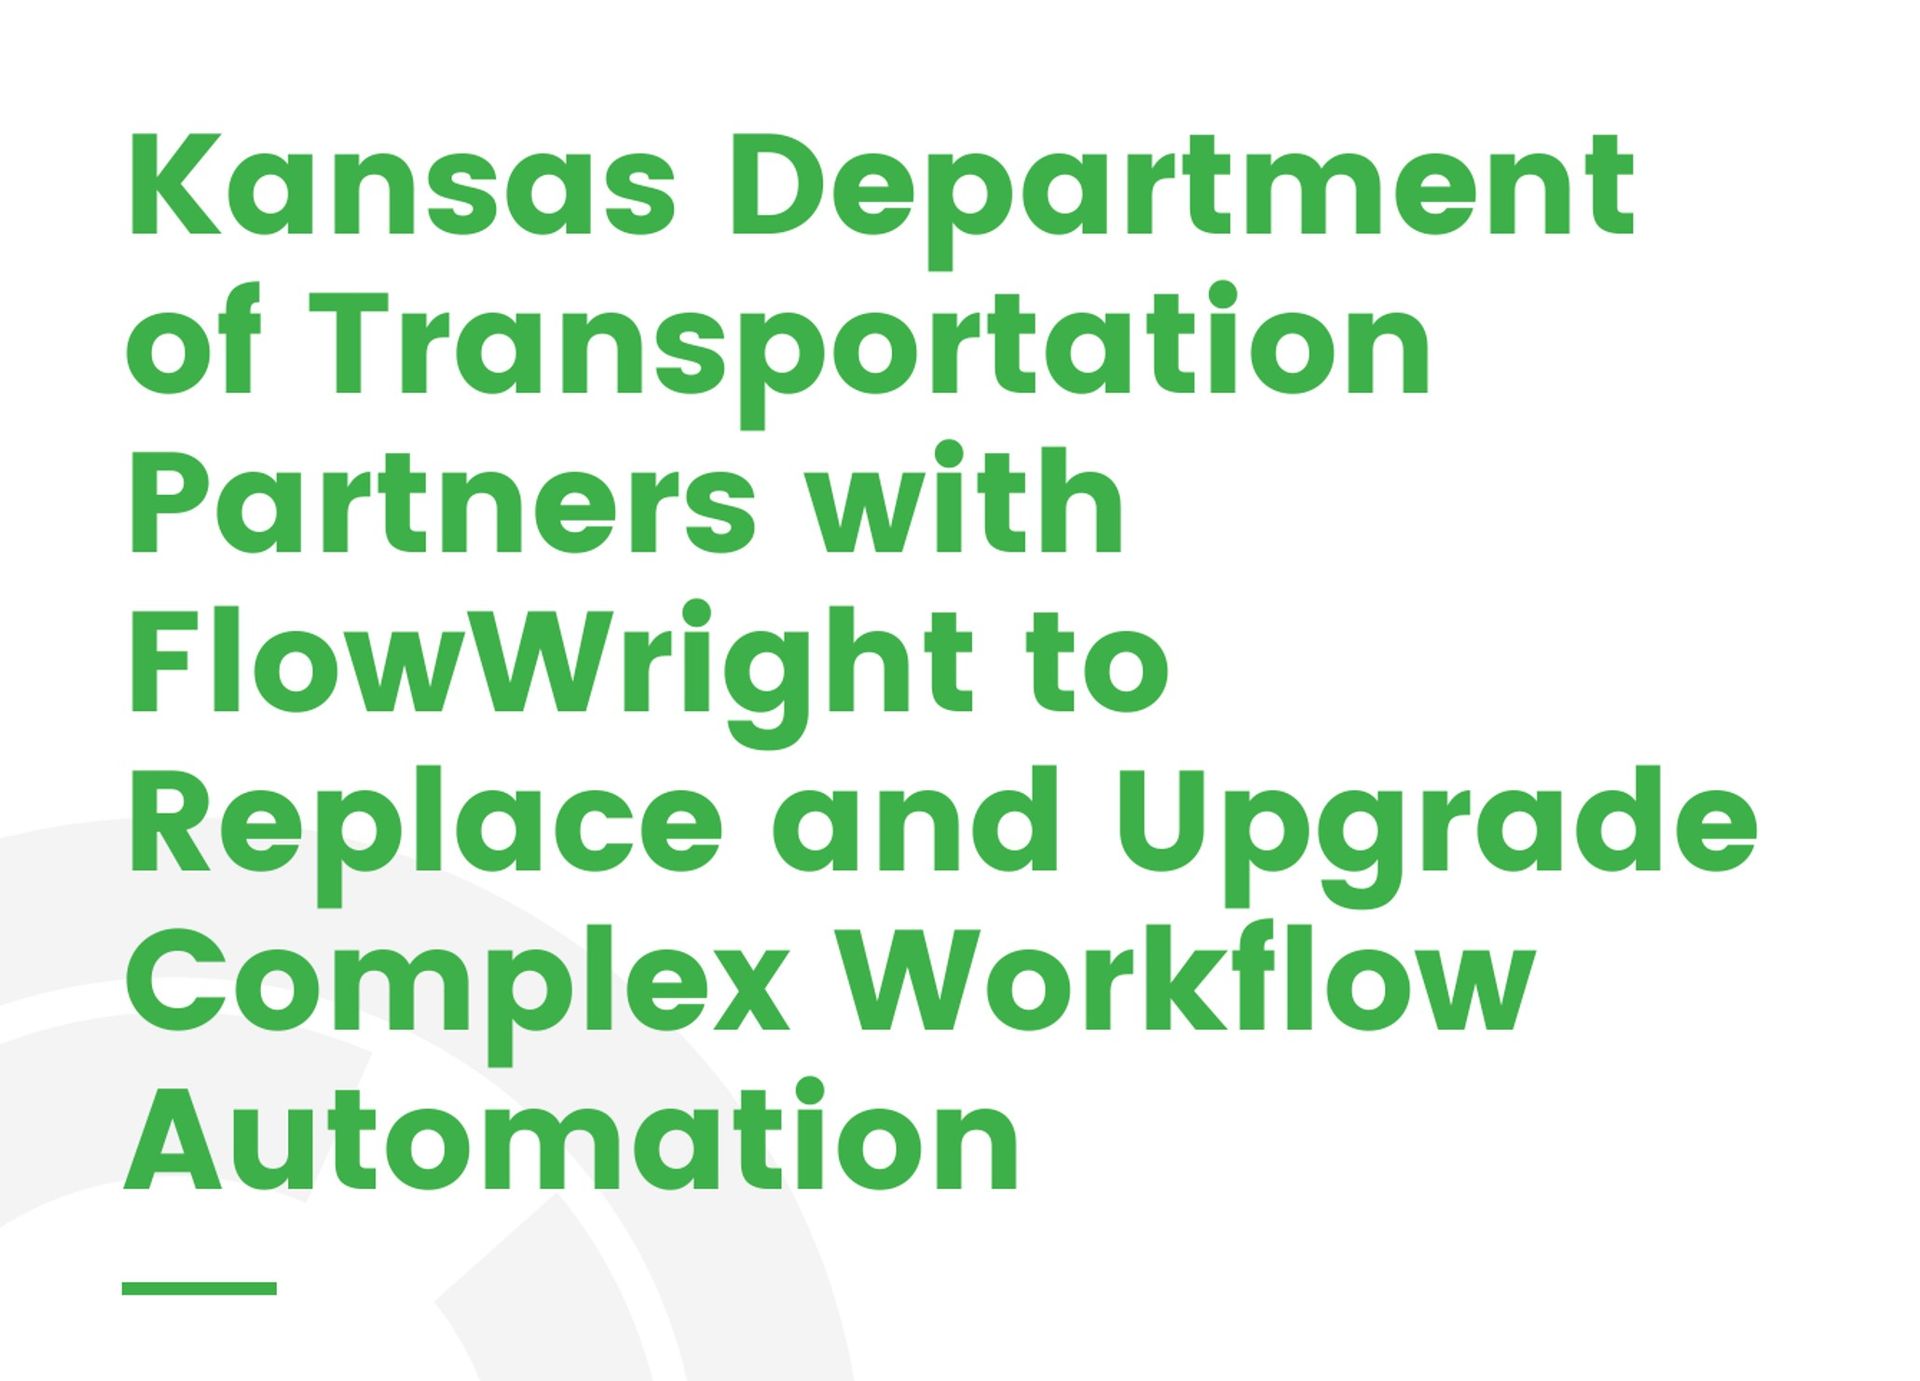 The kansas department of transportation partners with flowwright to replace and upgrade complex workflow automation.